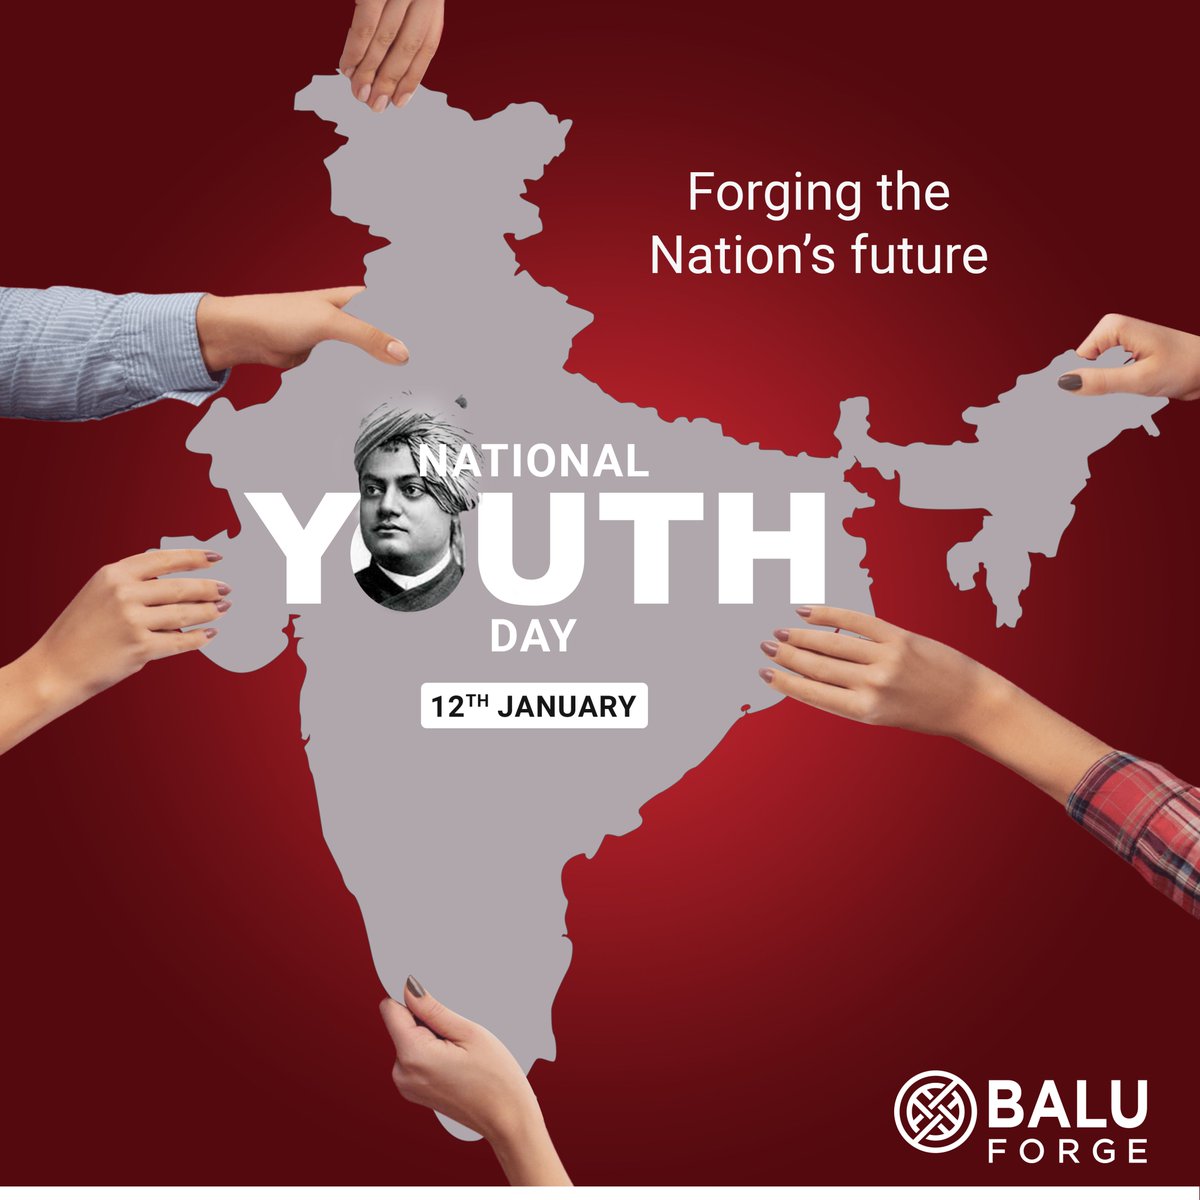 Celebrating the unstoppable spirit and progress-driven energy of the youth on National Youth Day! 🌟🇮🇳

#NationalYouthDay #BaluForge #Automotive #Manufacturing #Crankshafts #Engines